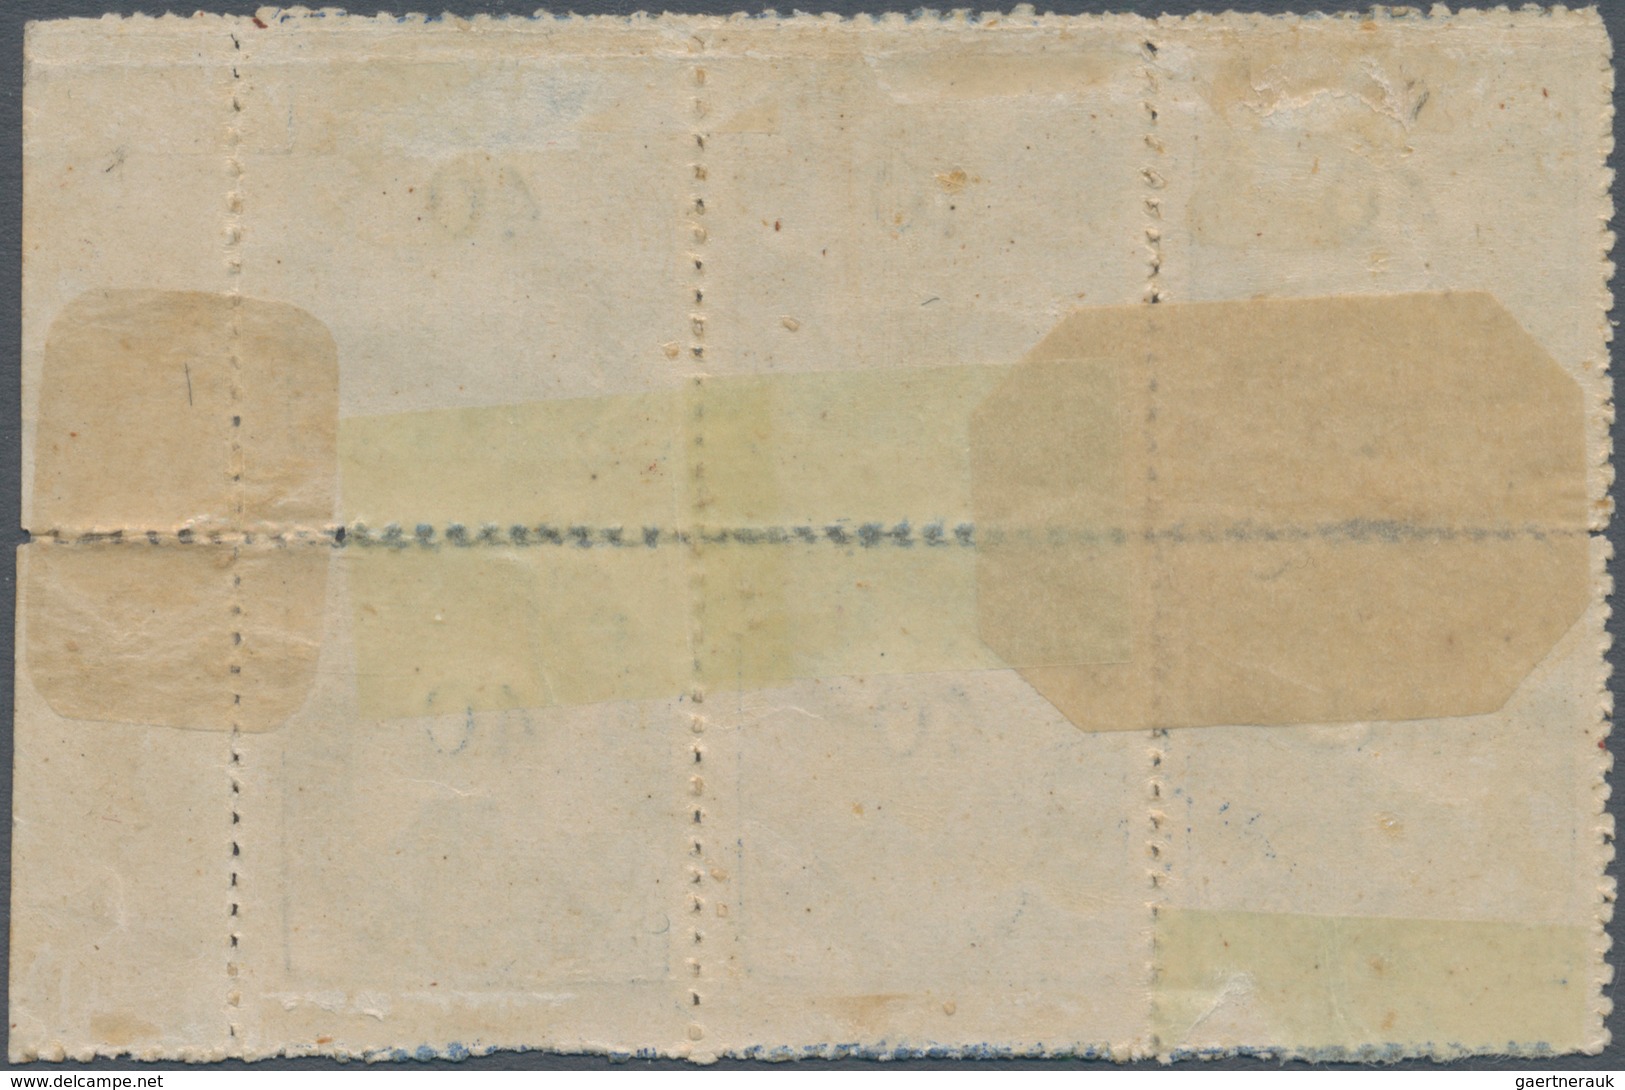 00423 Portugiesisch-Indien: 1871, Type II, 40 R. Dark Blue On Thick Paper, A Right Margin Block Of 6 (3x2) - Portuguese India